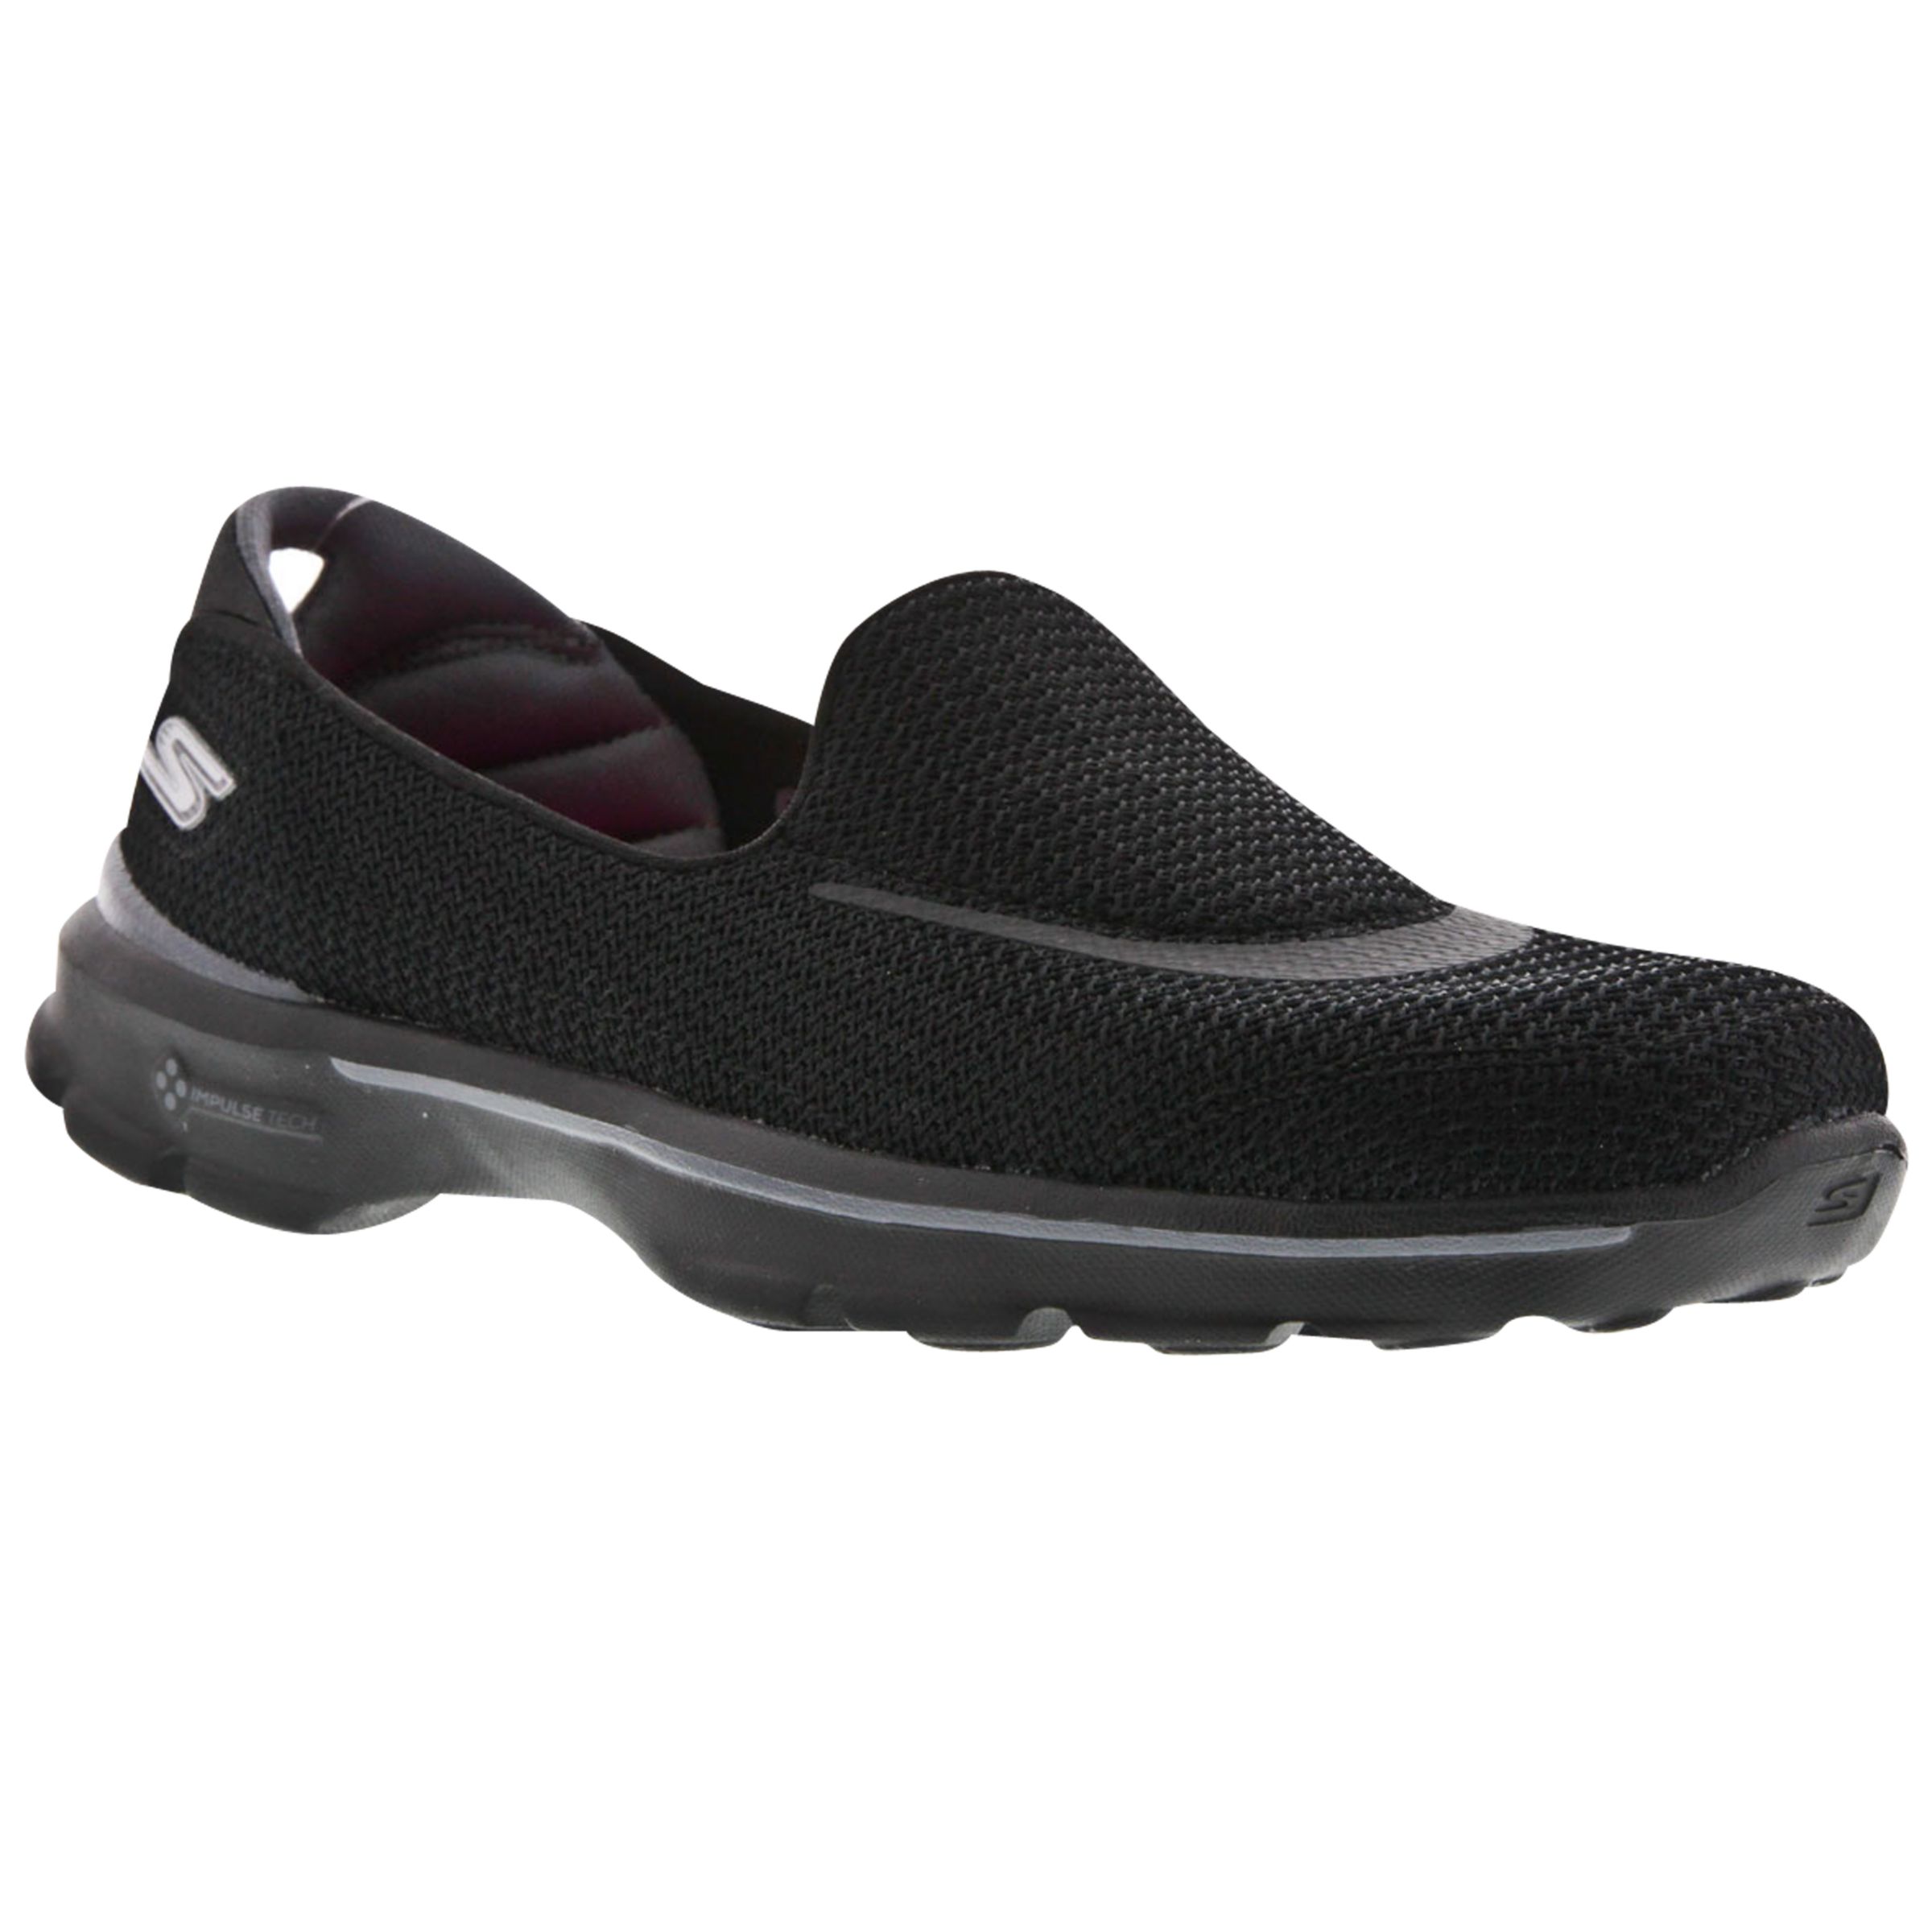 Skechers Go Walk 3 FitKnit Trainers at 